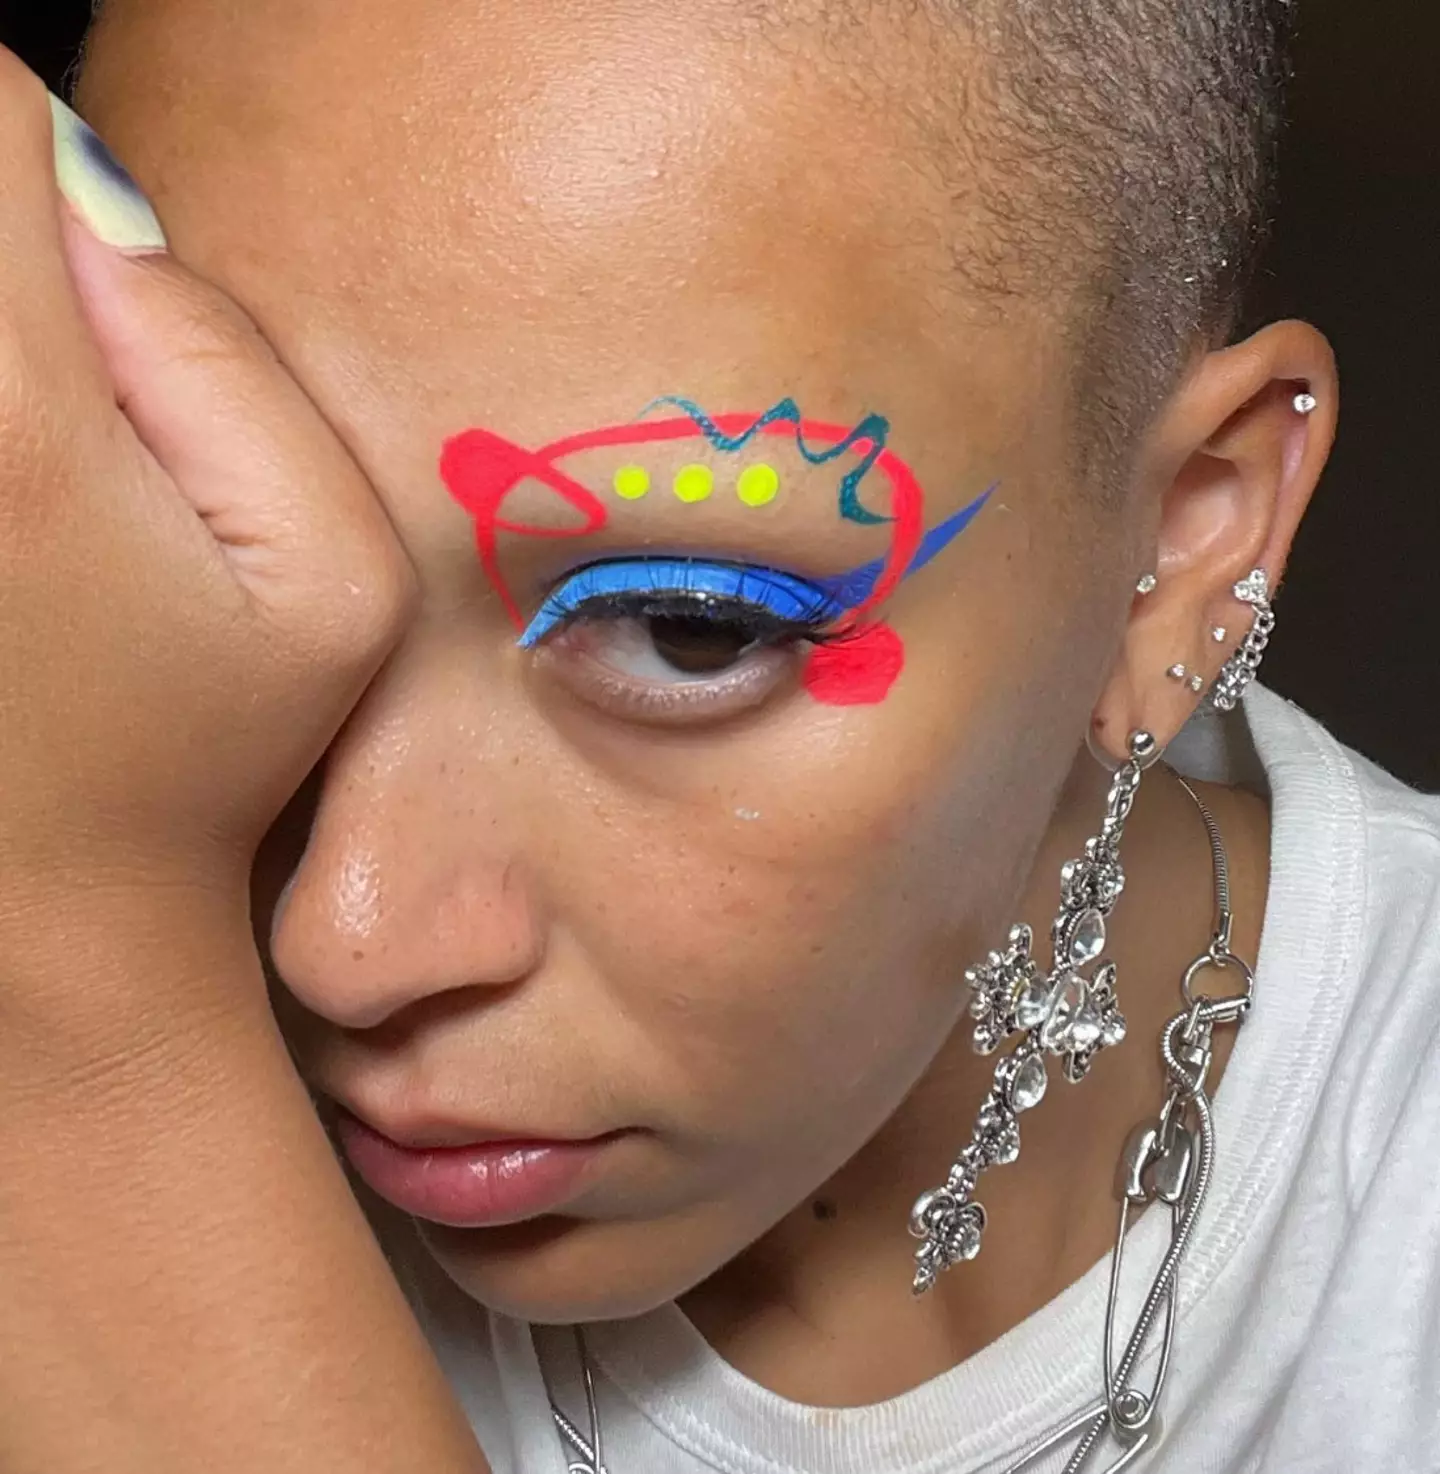 Doja Cat shaved her head and eyebrows in August last year.